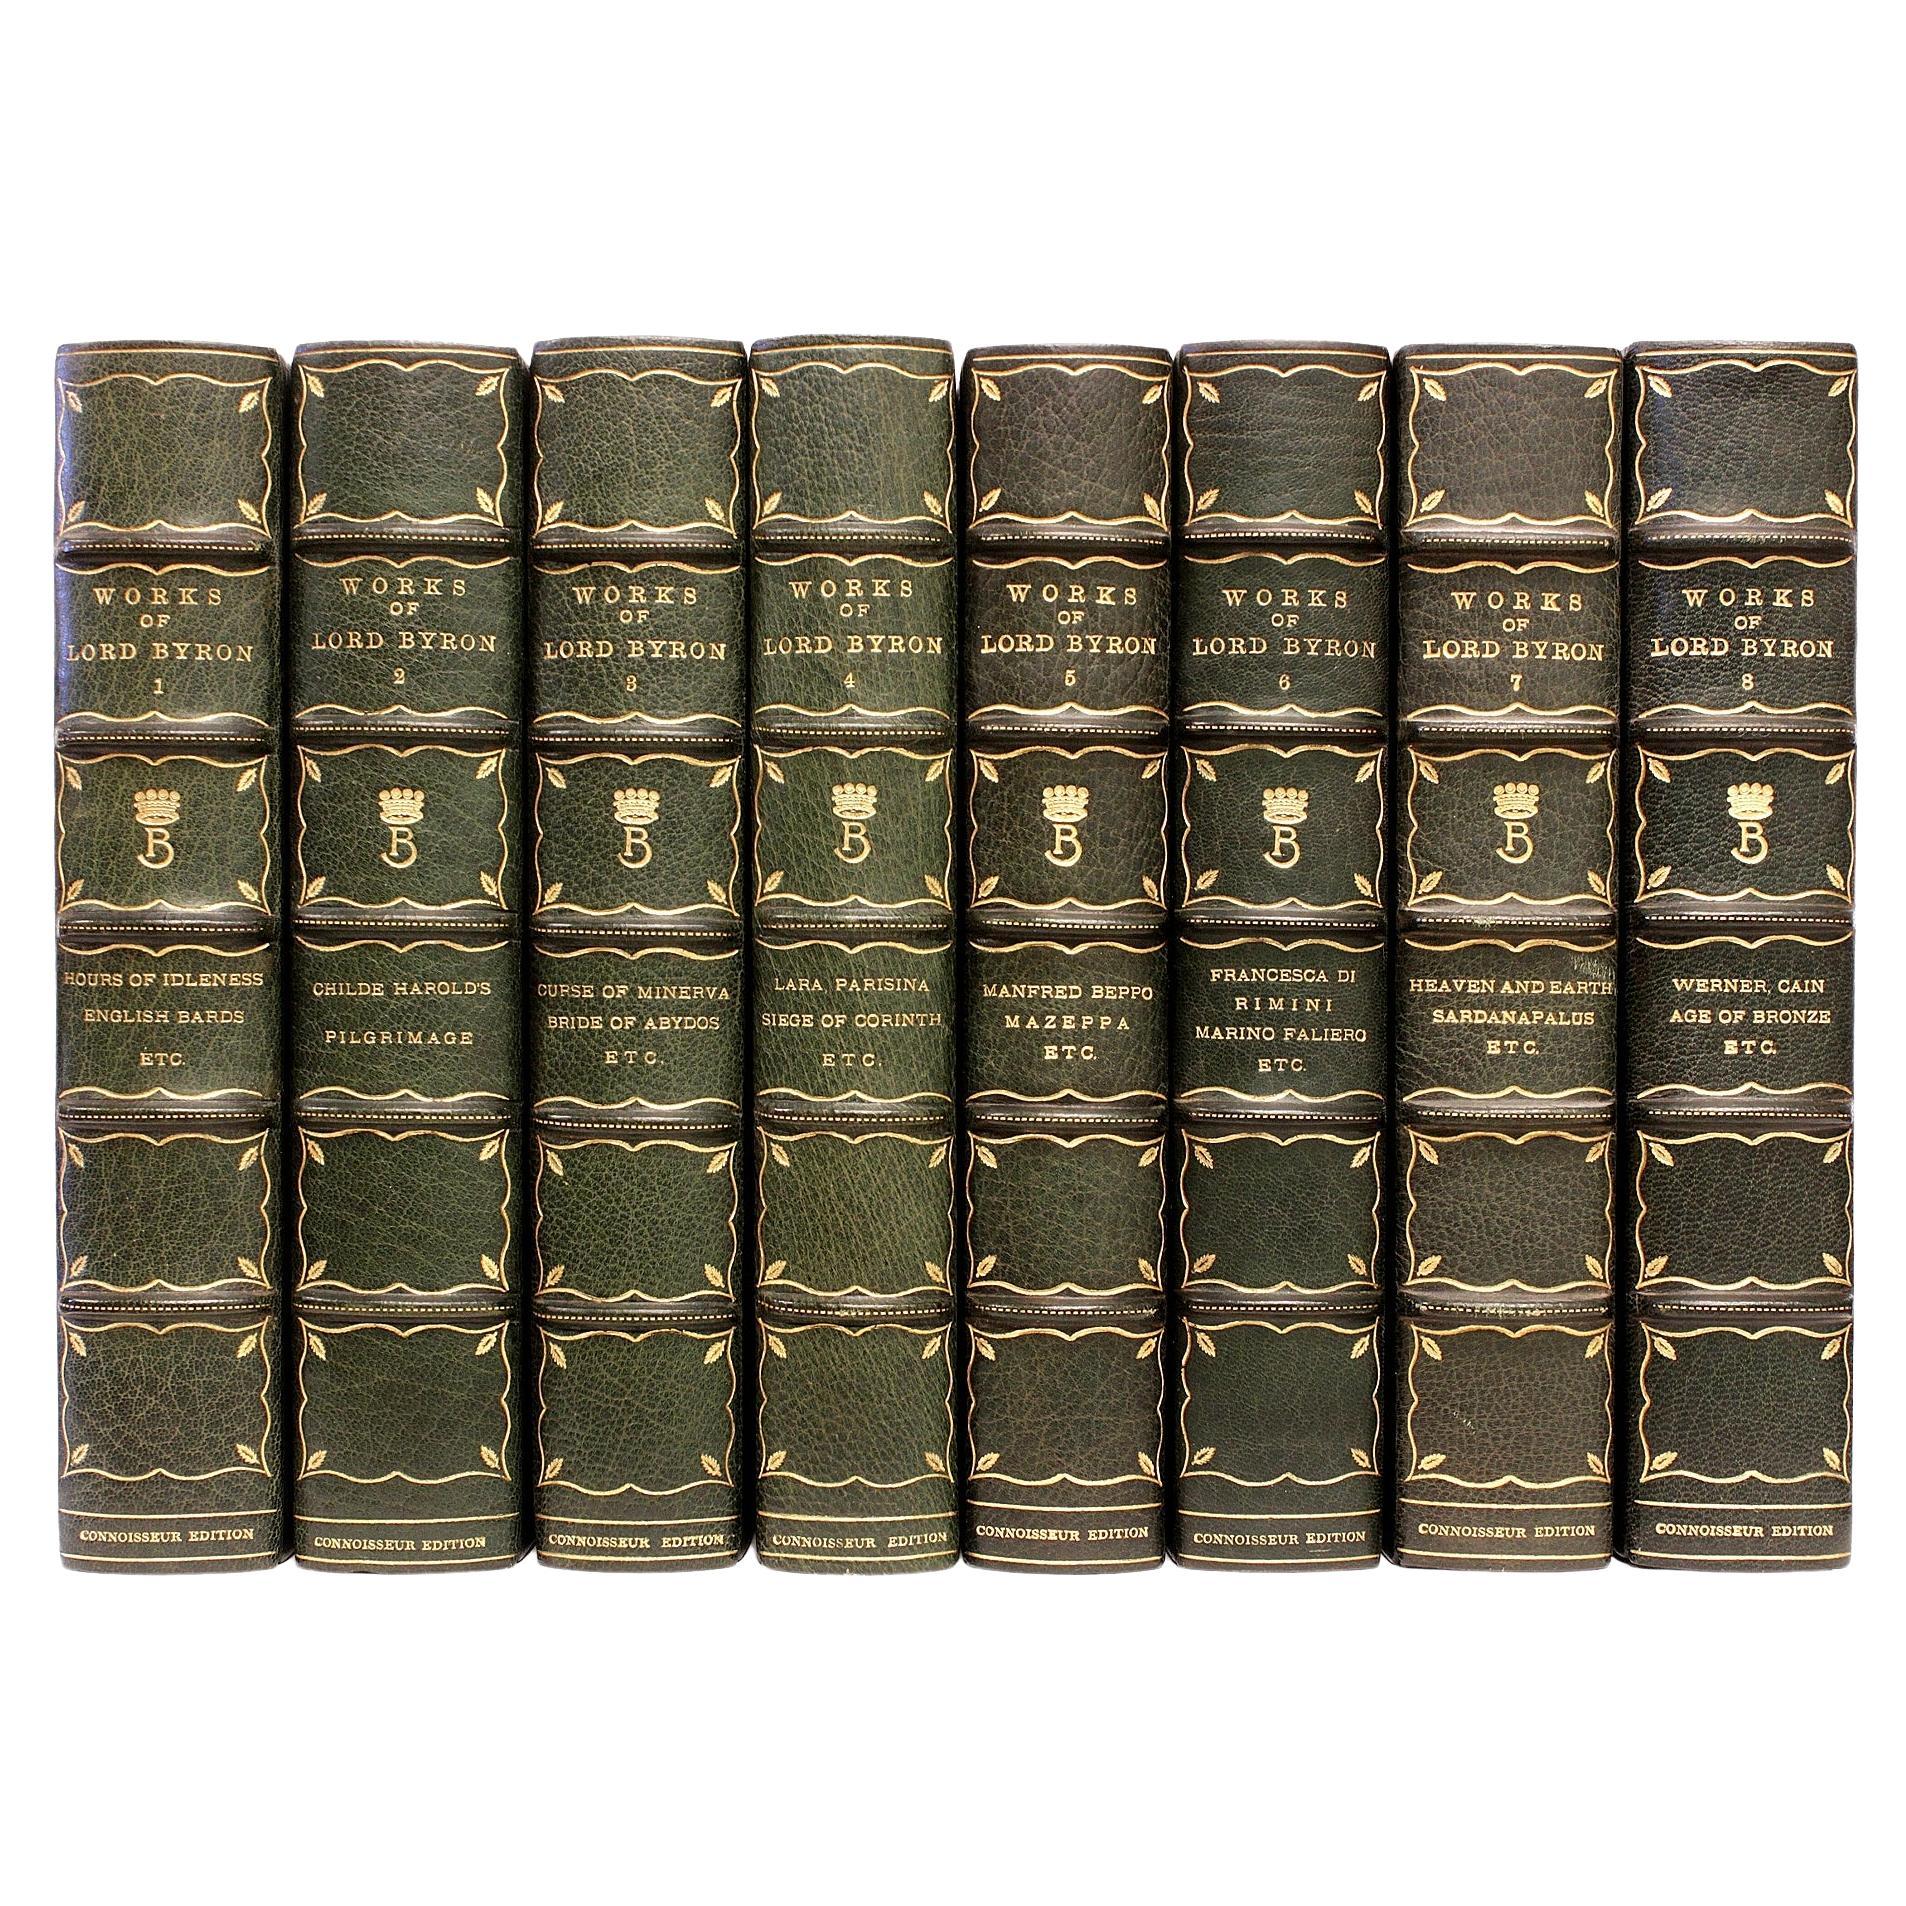 Works of Lord Byron, Connoisseur Edition, 16 Vols., in a Fine Leather Binding